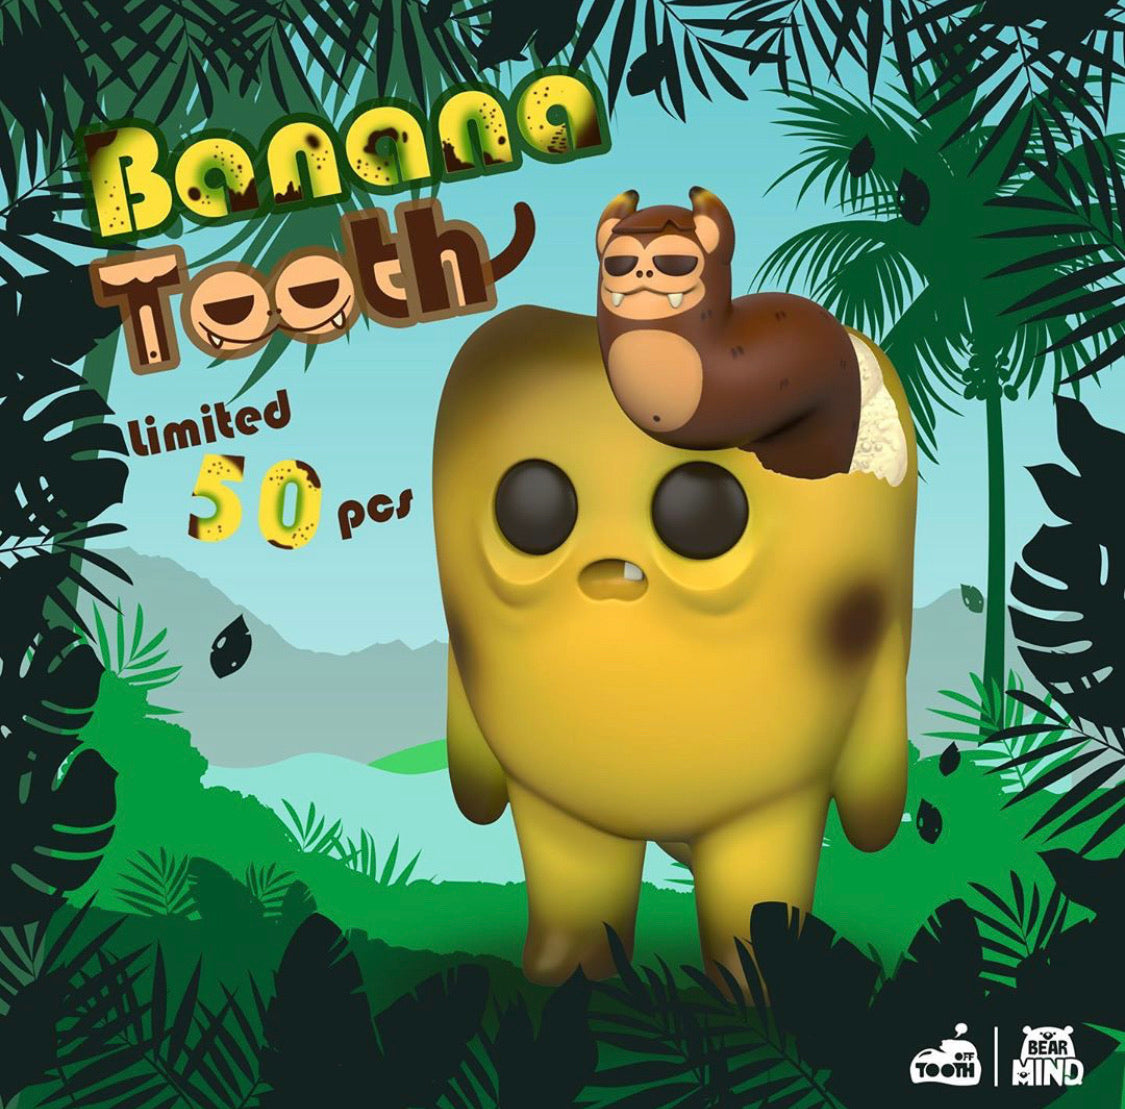 Tooth Off Banana Tooth by Bear In Mind Toys